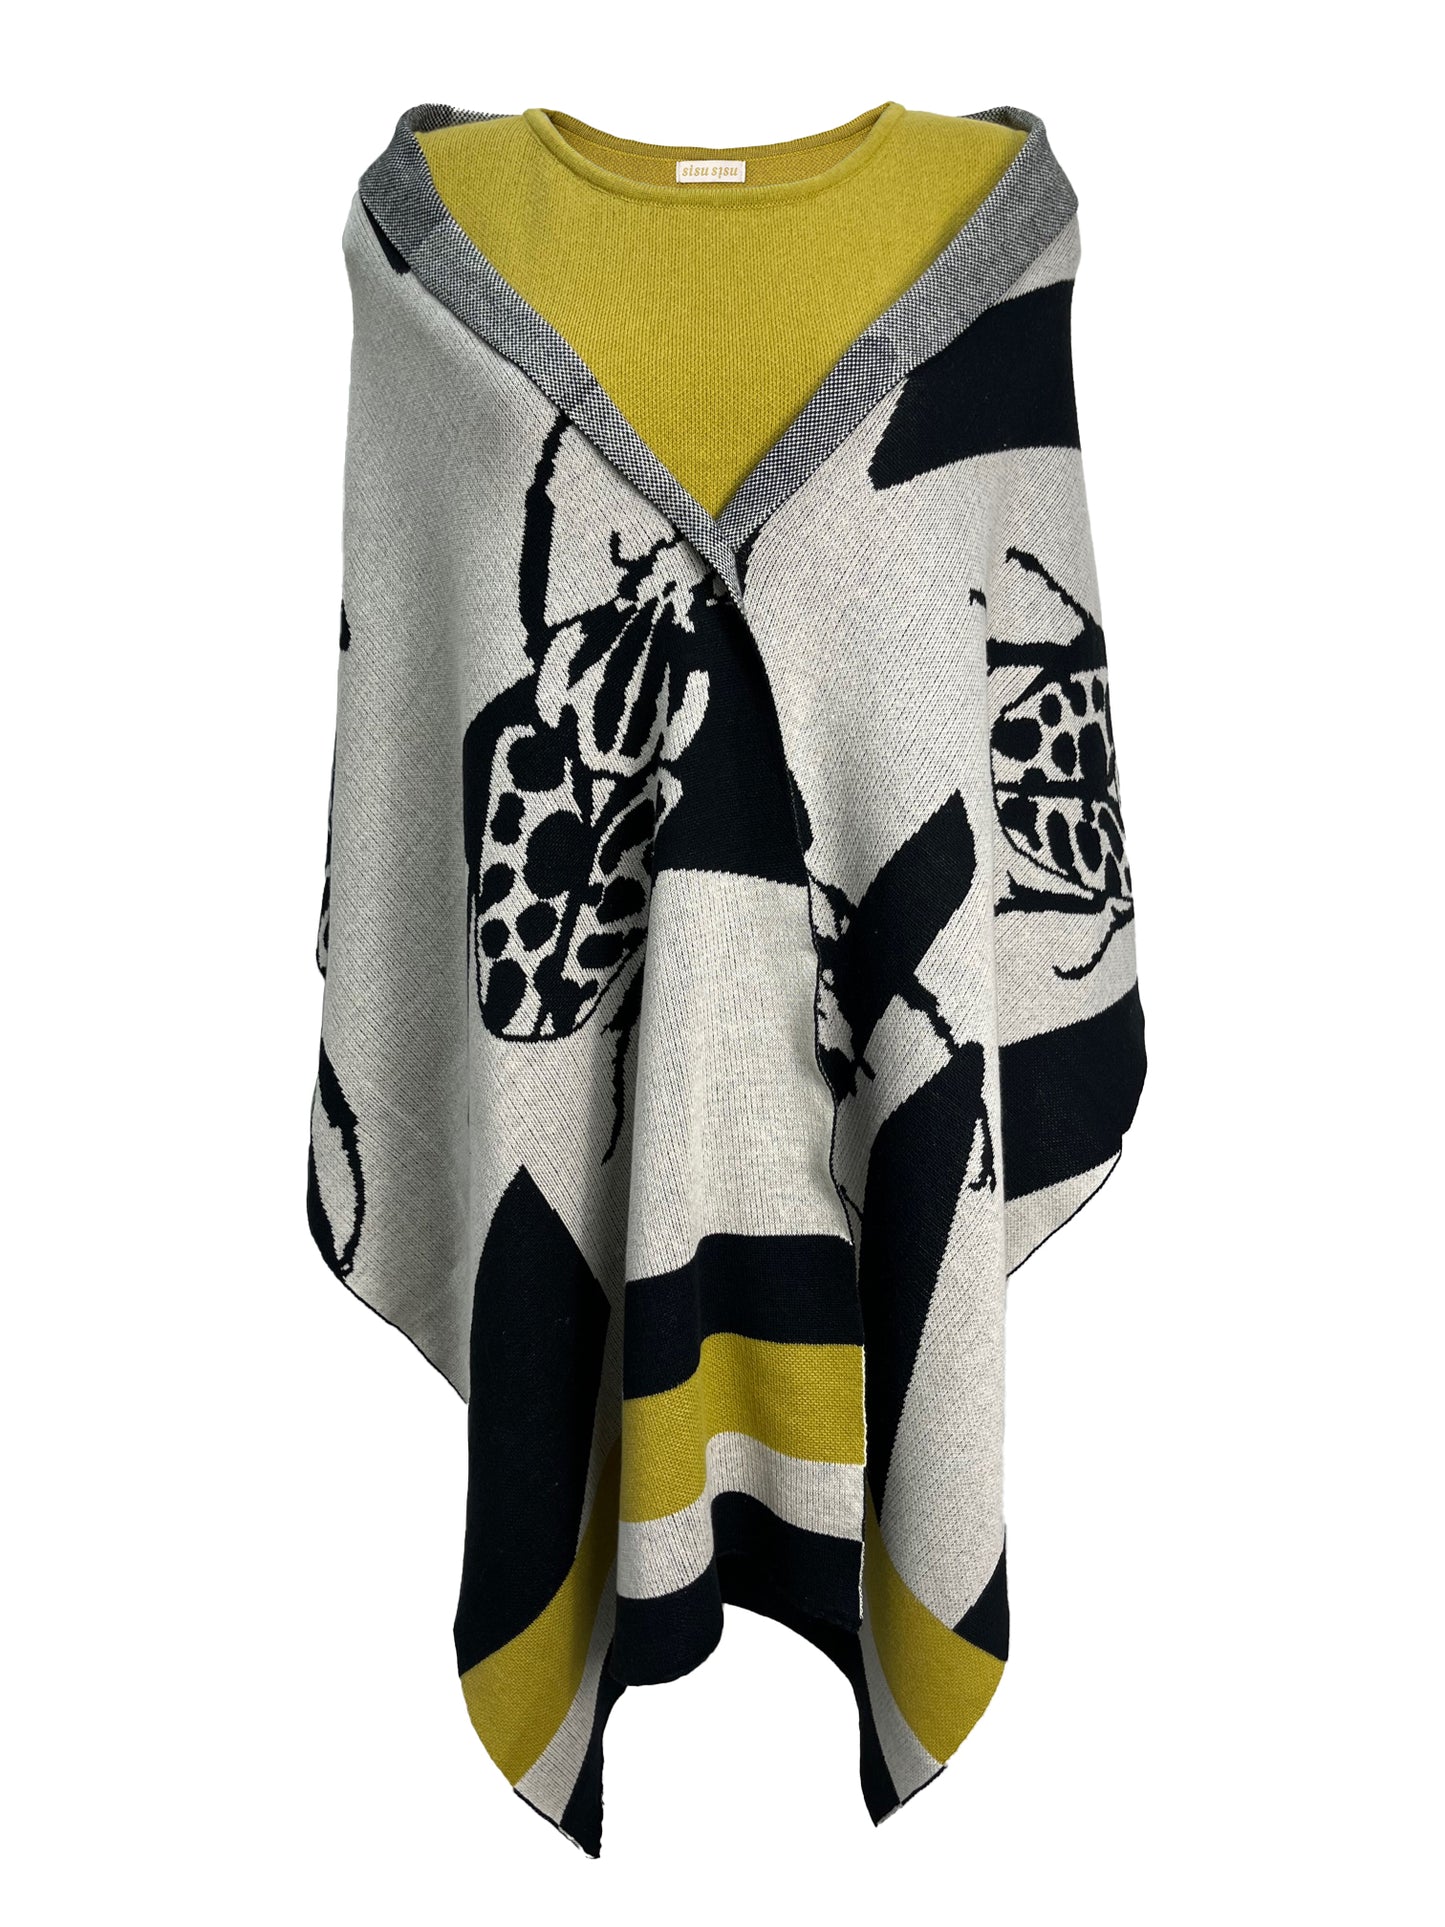 Mosaic Goliath Beetle Cotton Knitted Scarf - Black Ivory & Chartreuse